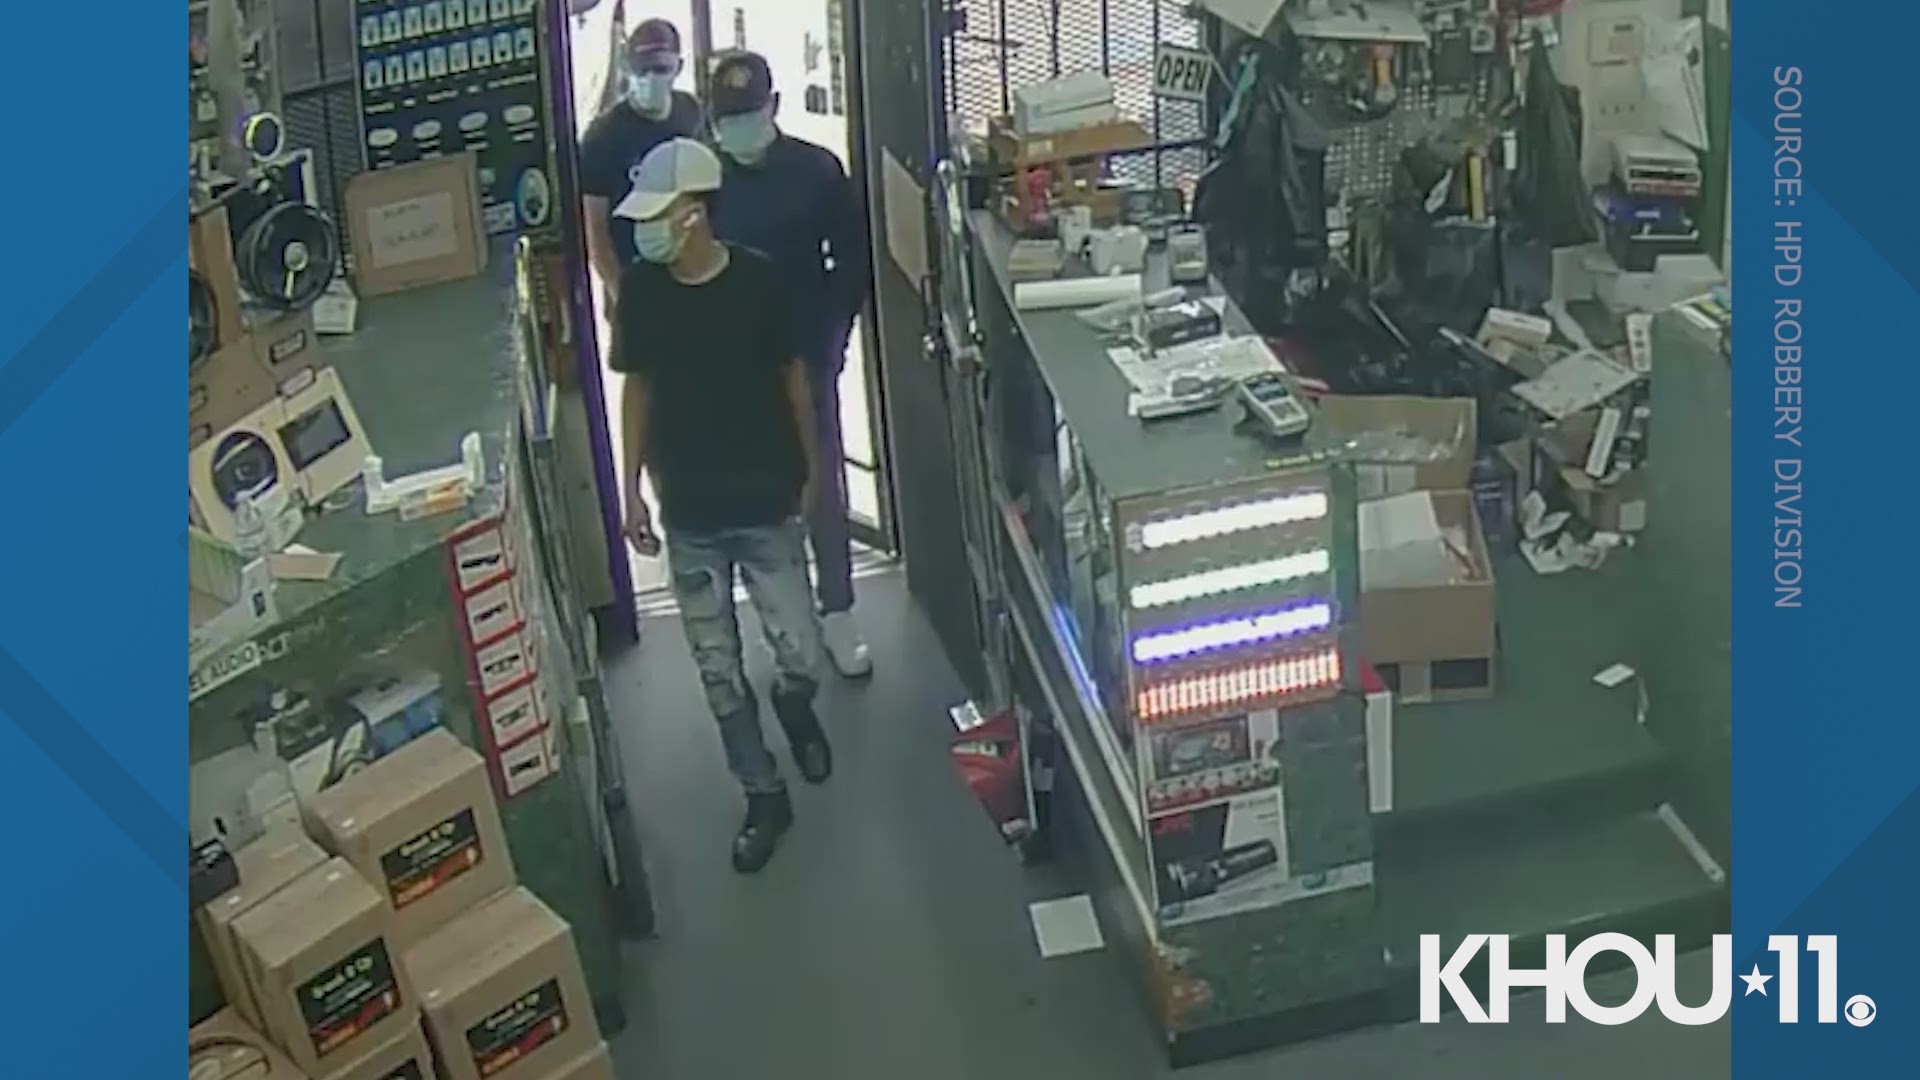 Houston police released surveillance video Wednesday of several men wearing surgical masks while robbing an electronics store in west Houston.